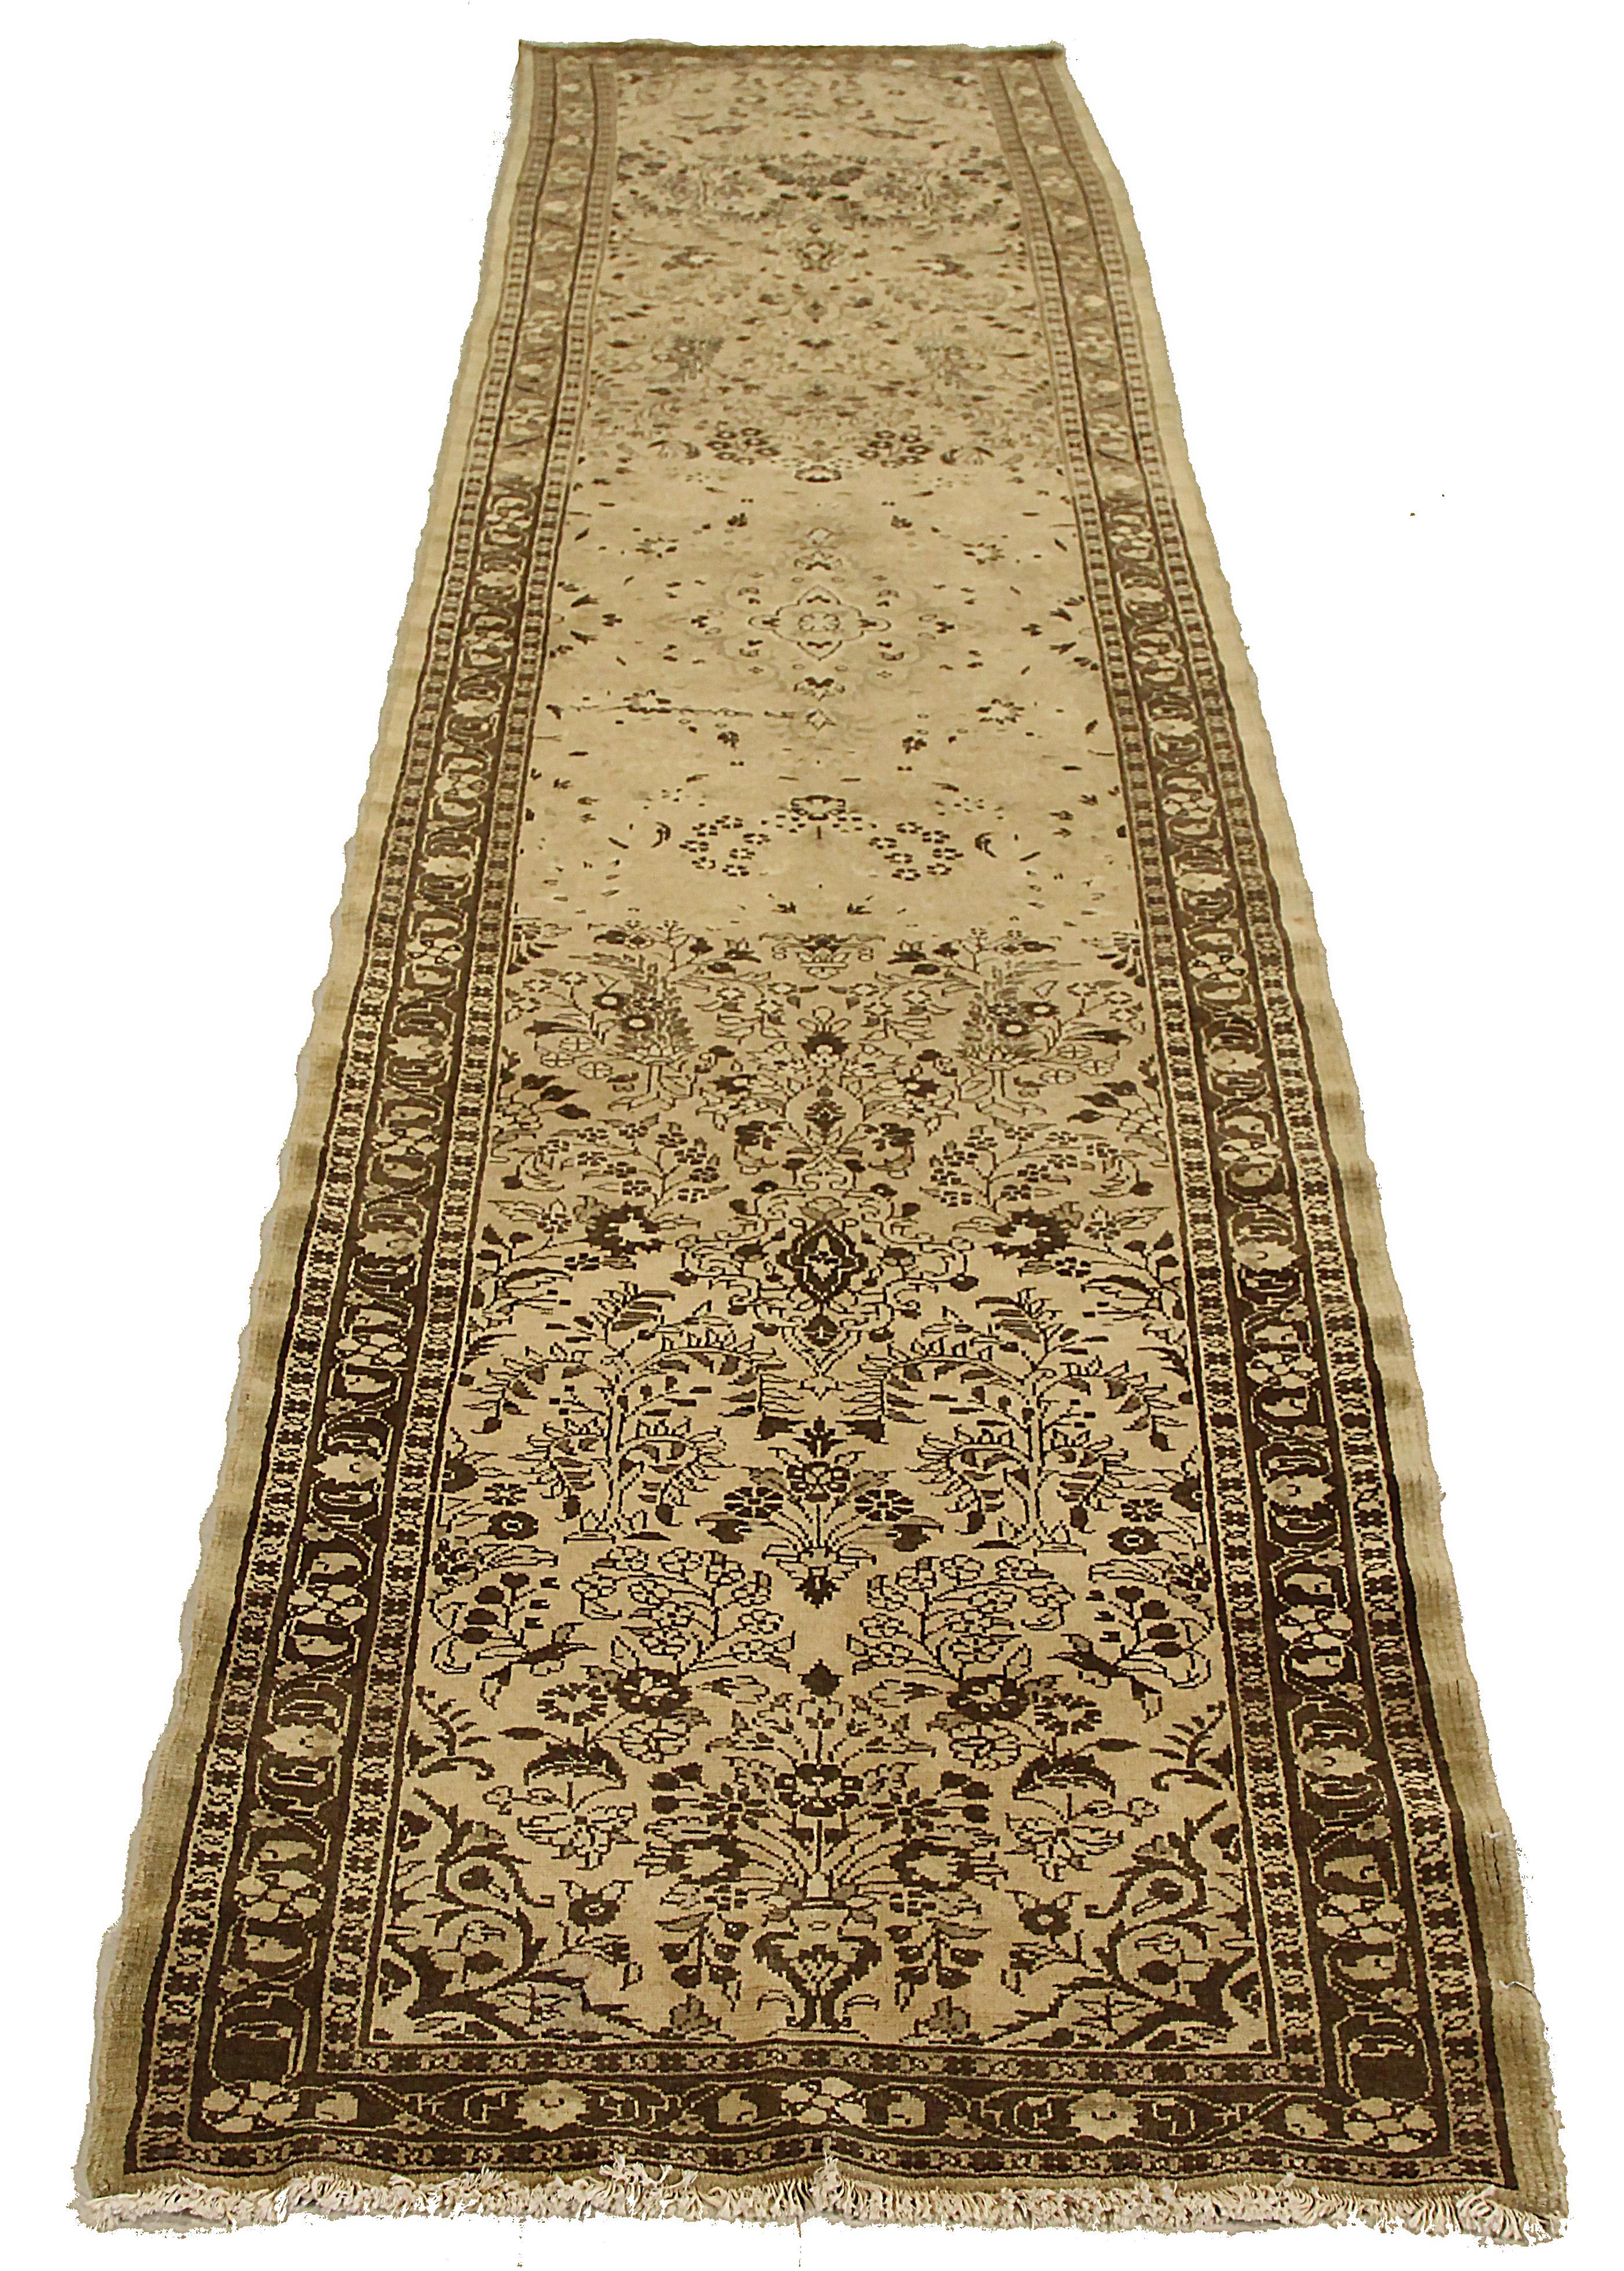 Antique Persian runner rug handwoven from the finest sheep’s wool. It’s colored with all-natural vegetable dyes that are safe for humans and pets. It’s a traditional Malayer design featuring floral design on a brown field. It’s a lovely piece to